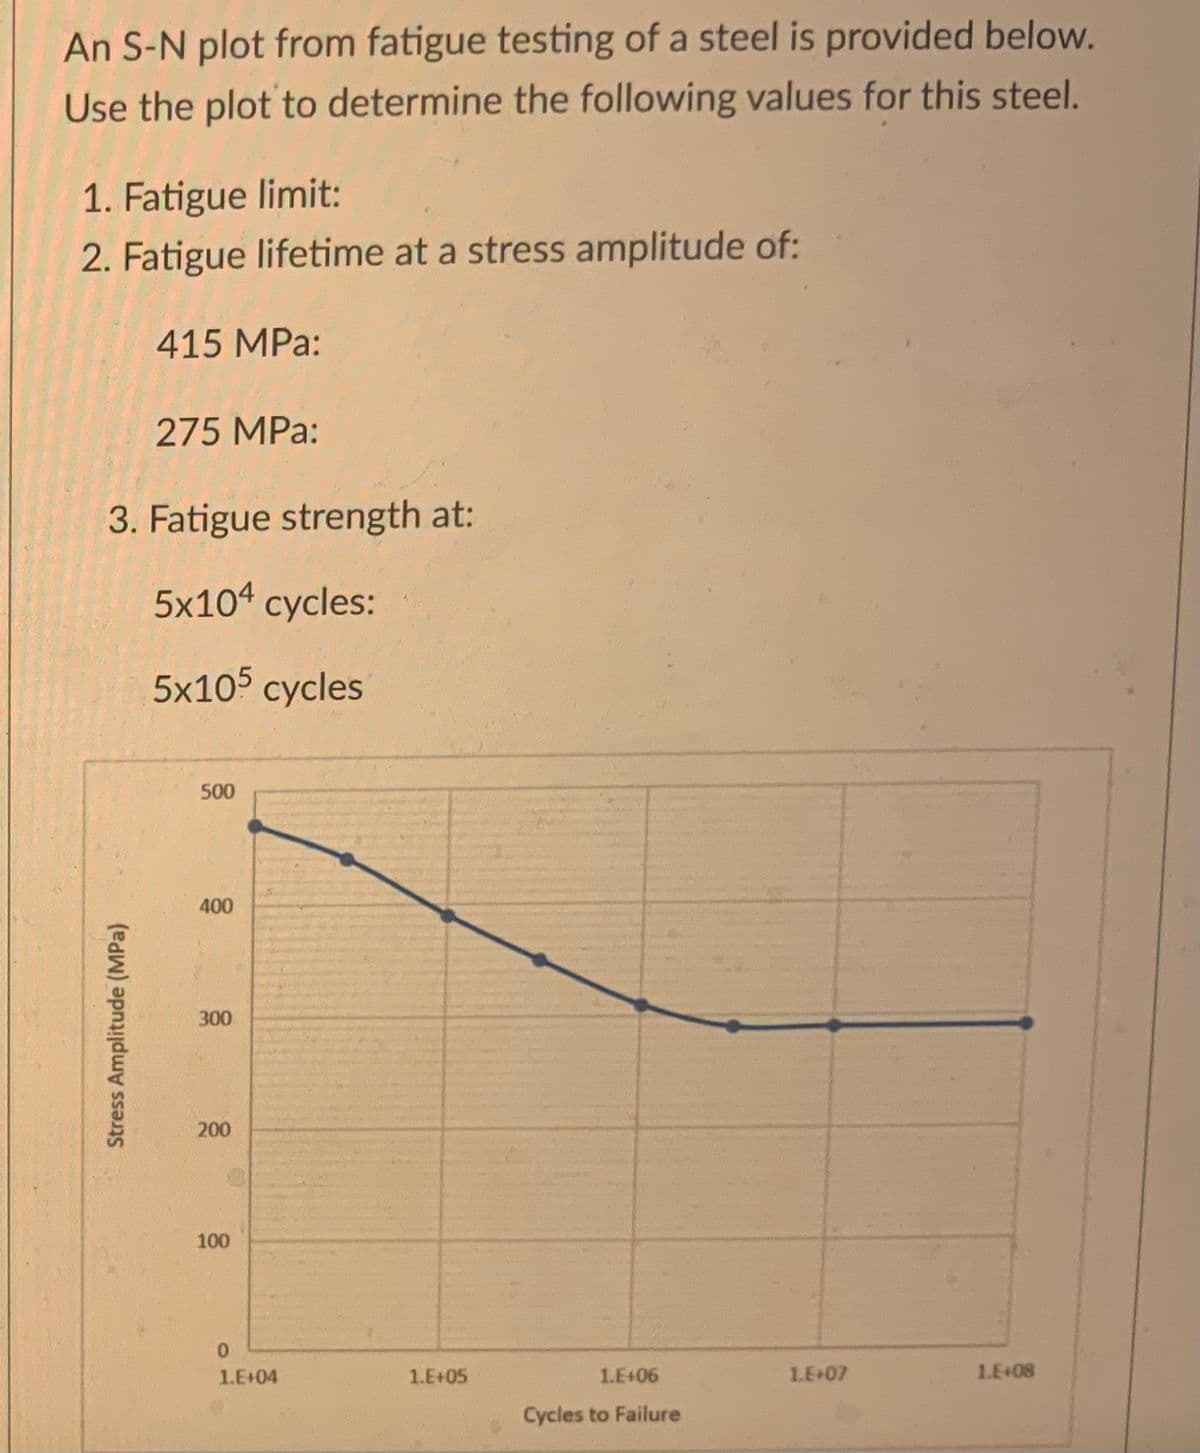 An S-N plot from fatigue testing of a steel is provided below.
Use the plot to determine the following values for this steel.
1. Fatigue limit:
2. Fatigue lifetime at a stress amplitude of:
415 MPa:
275 MPa:
3. Fatigue strength at:
5x104 cycles:
5x105 cycles
500
400
300
200
100
0
1.E+04
Stress Amplitude (MPa)
1.E+05
1.E+06
Cycles to Failure
1.E+07
1.E+08